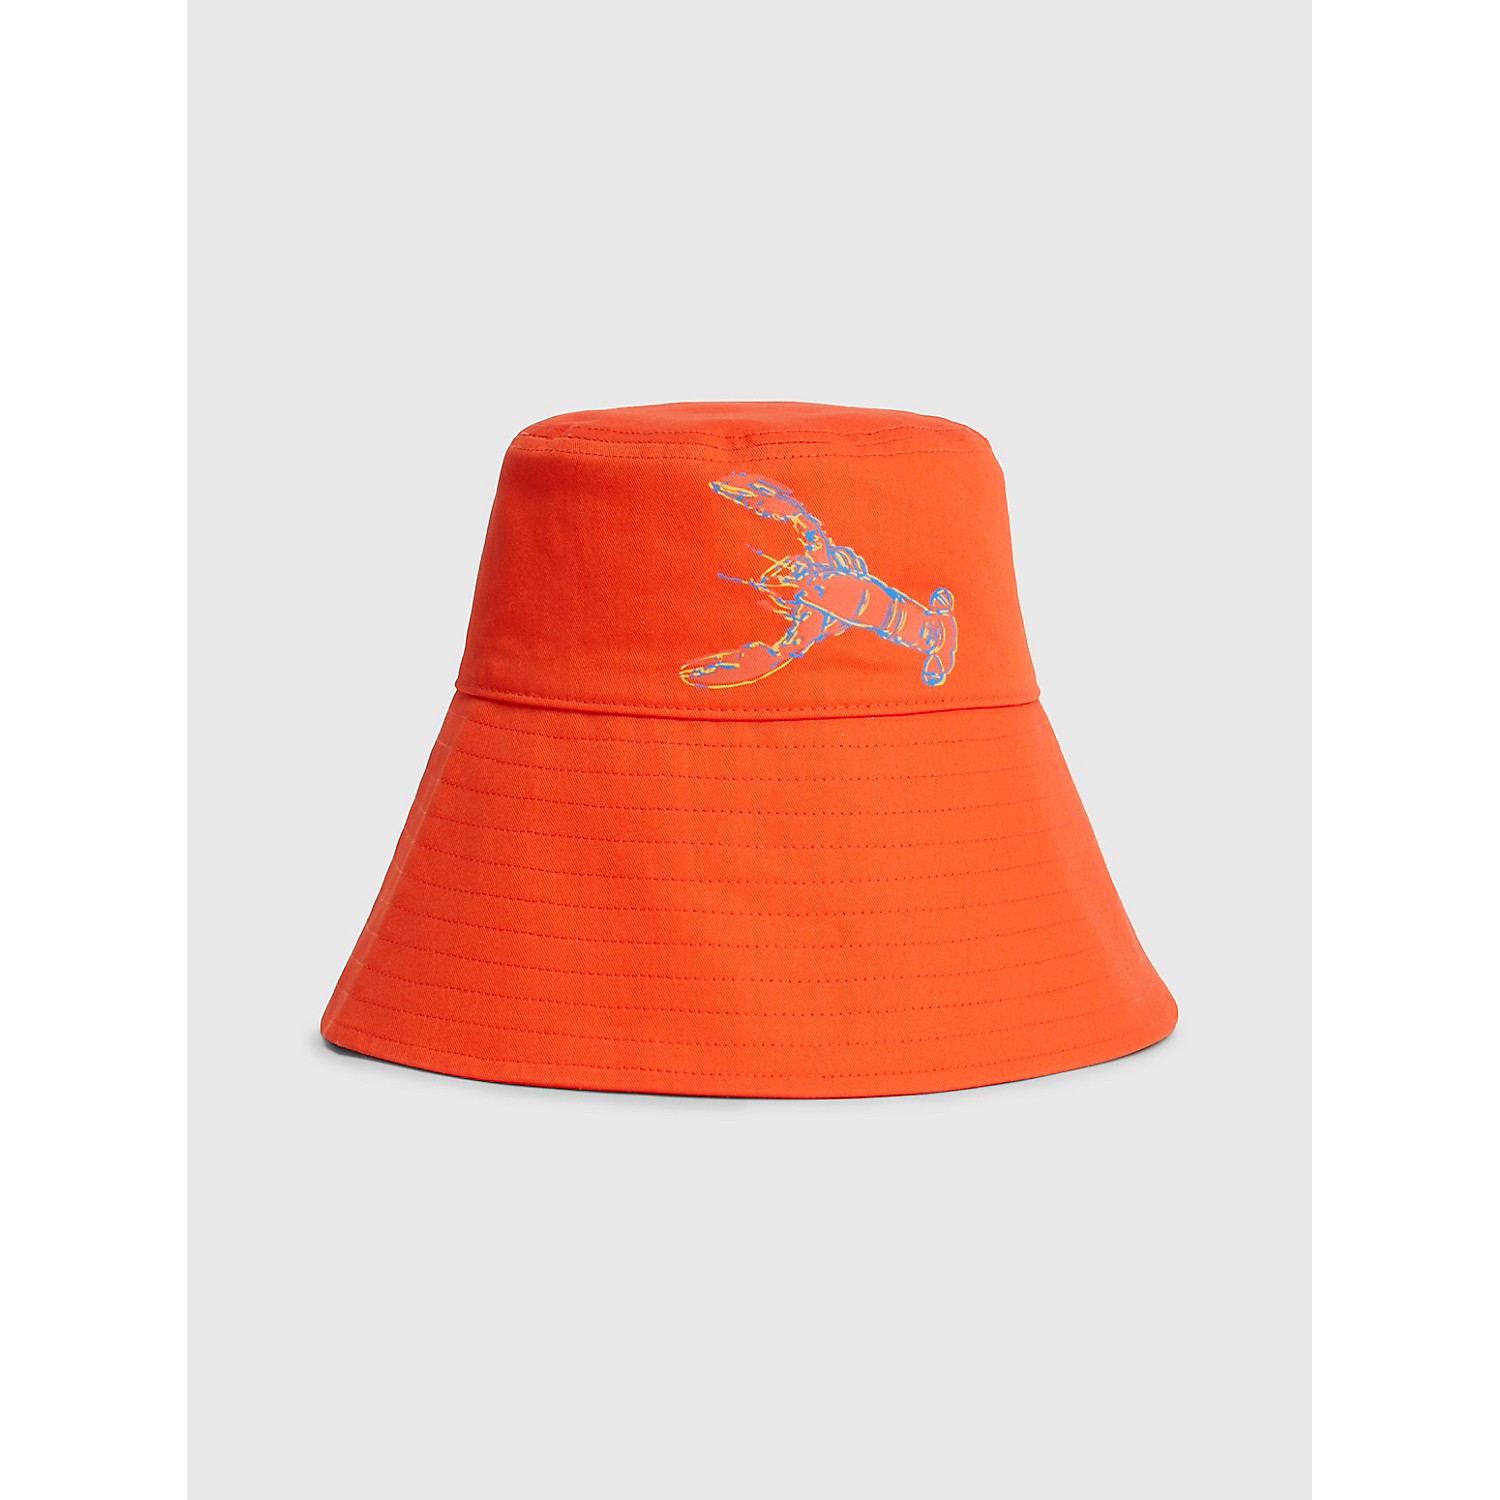 TOMMY HILFIGER TH X ANDY WARHOL Reversible Bucket Hat